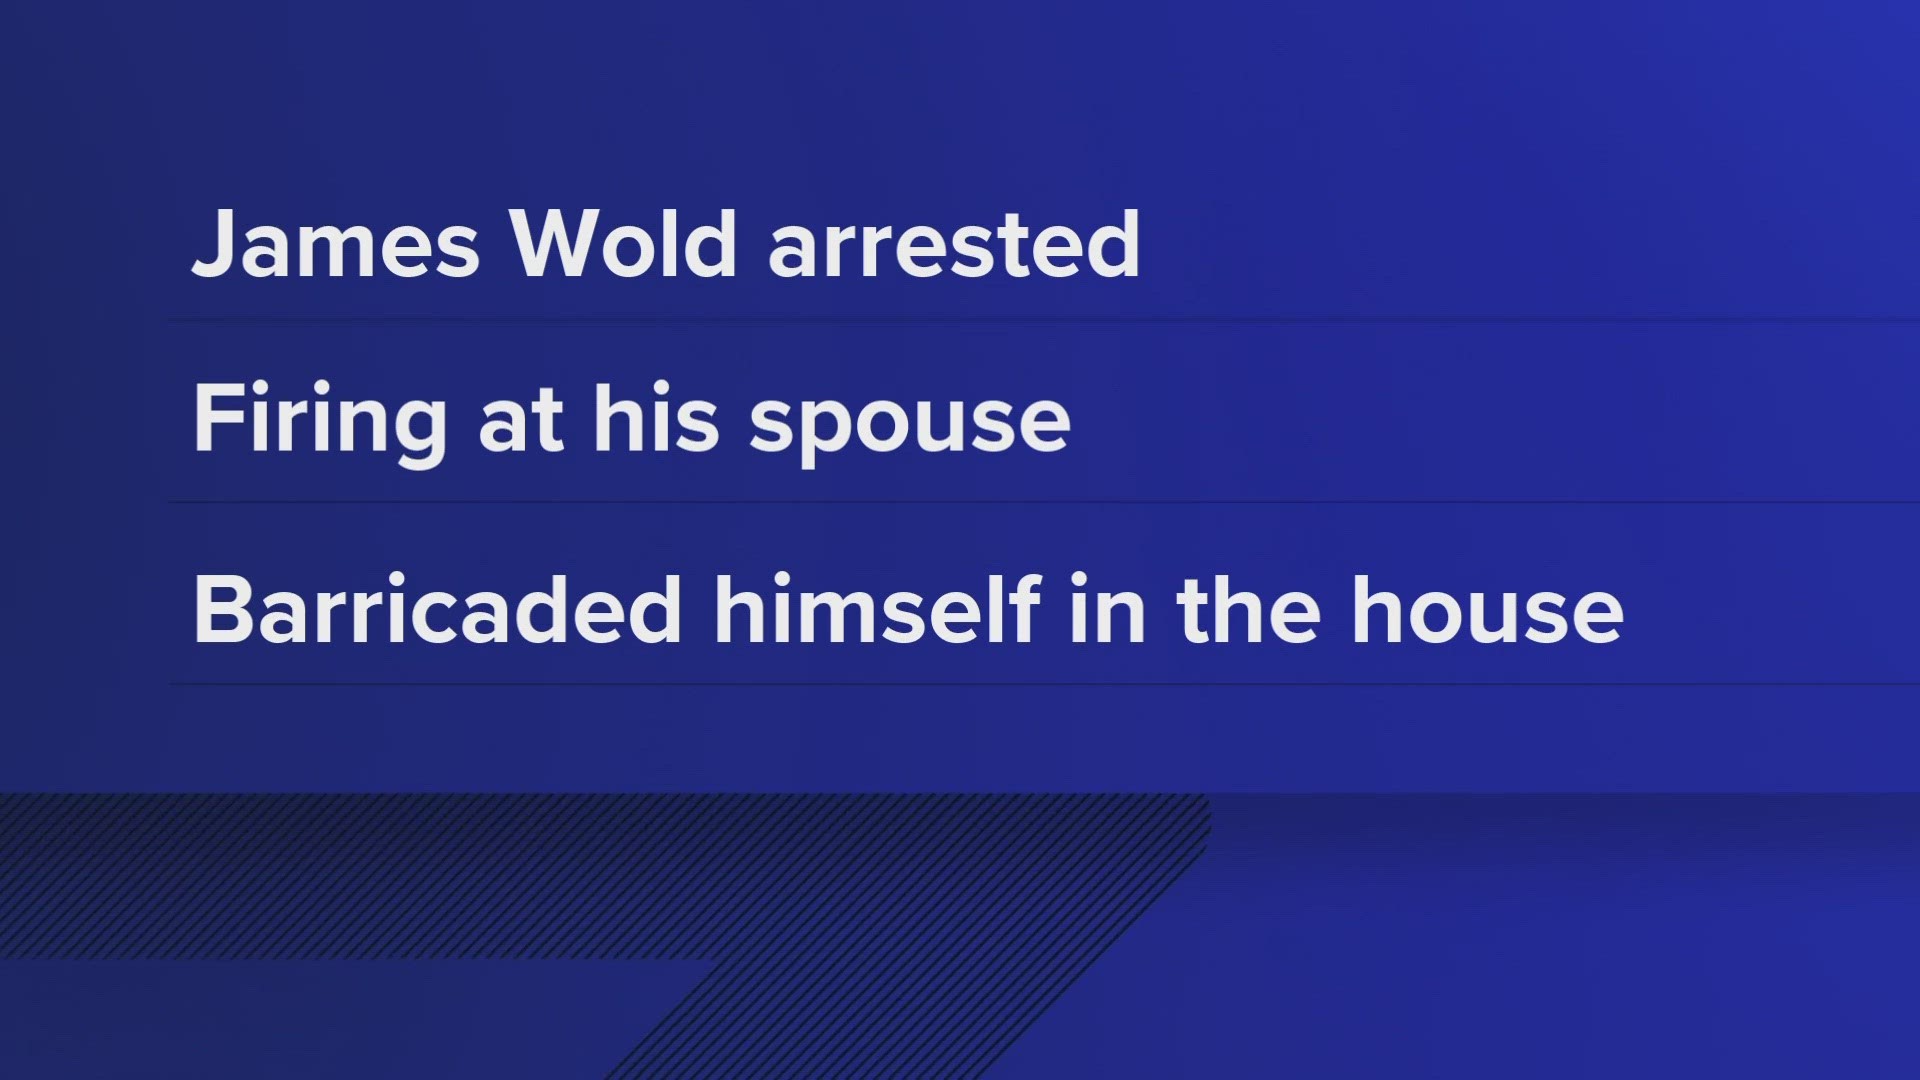 According to the Loudon County Sheriff's Office, James Wold fired shots at his spouse after a verbal argument.